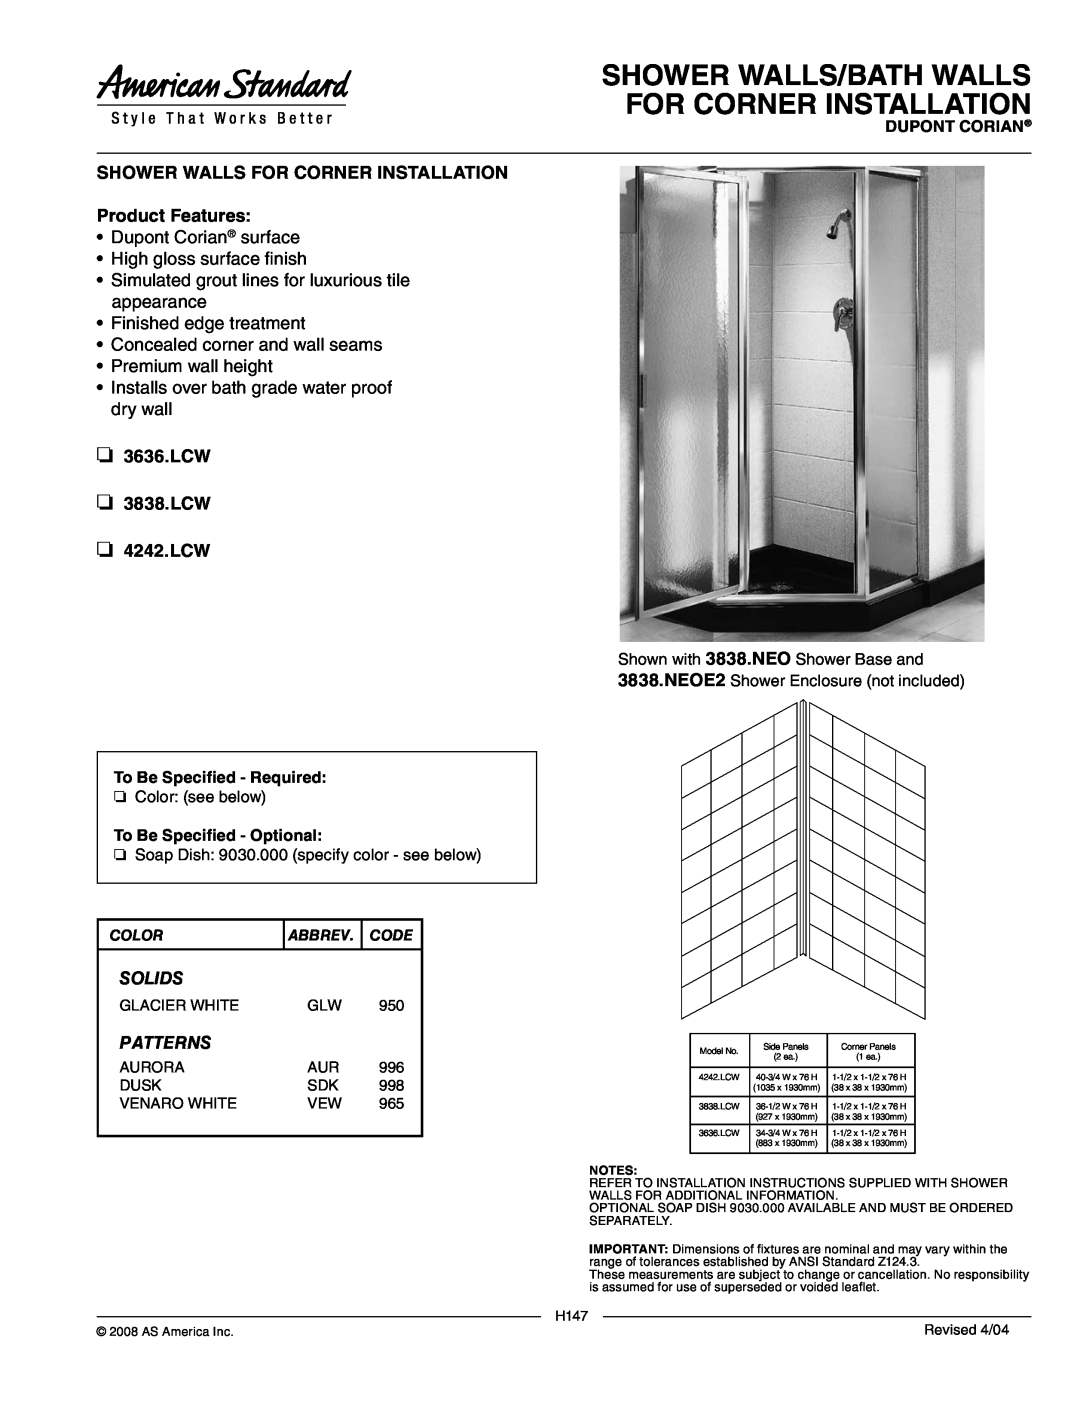 American Standard 4242.LCW installation instructions Shower Walls/Bath Walls For Corner Installation, Product Features 